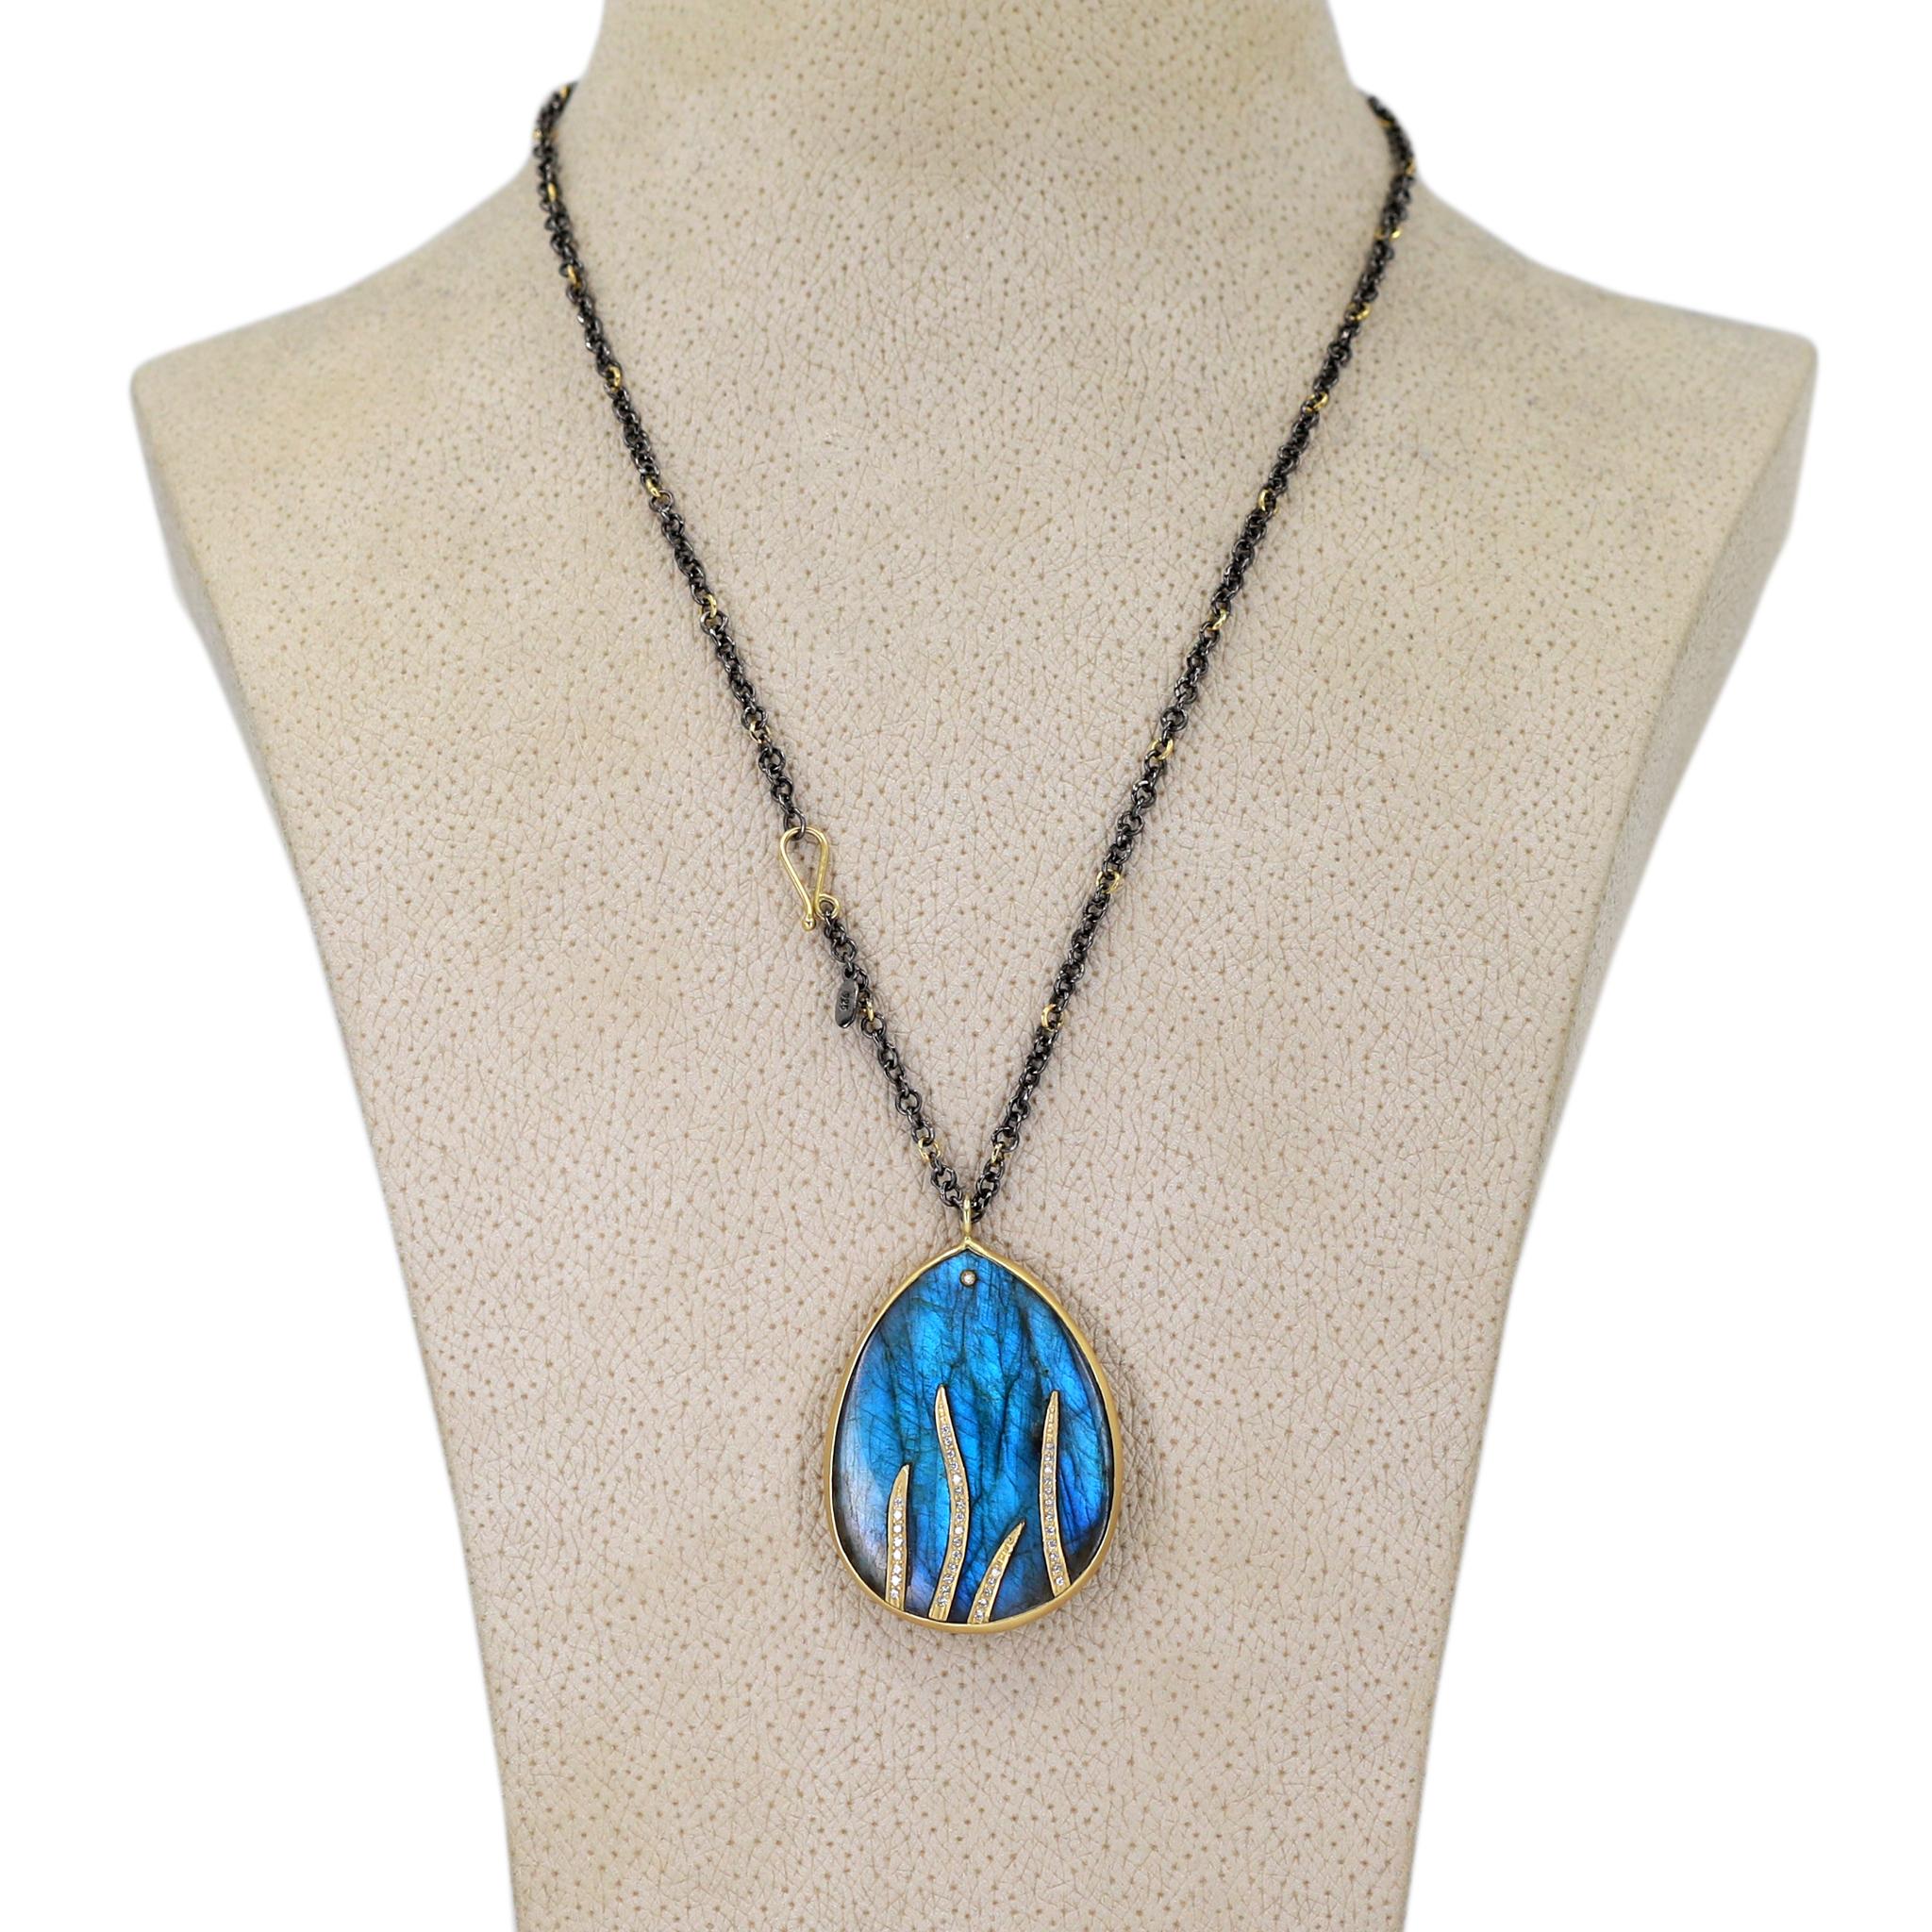 One of a Kind Necklace handcrafted by acclaimed jewelry maker Tej Kothari featuring a spectacular 39mm x 30mm labradorite tear drop cabochon, bezel-set in matte-finished 18k yellow gold, and inlaid with four 18k yellow gold brilliant-cut white